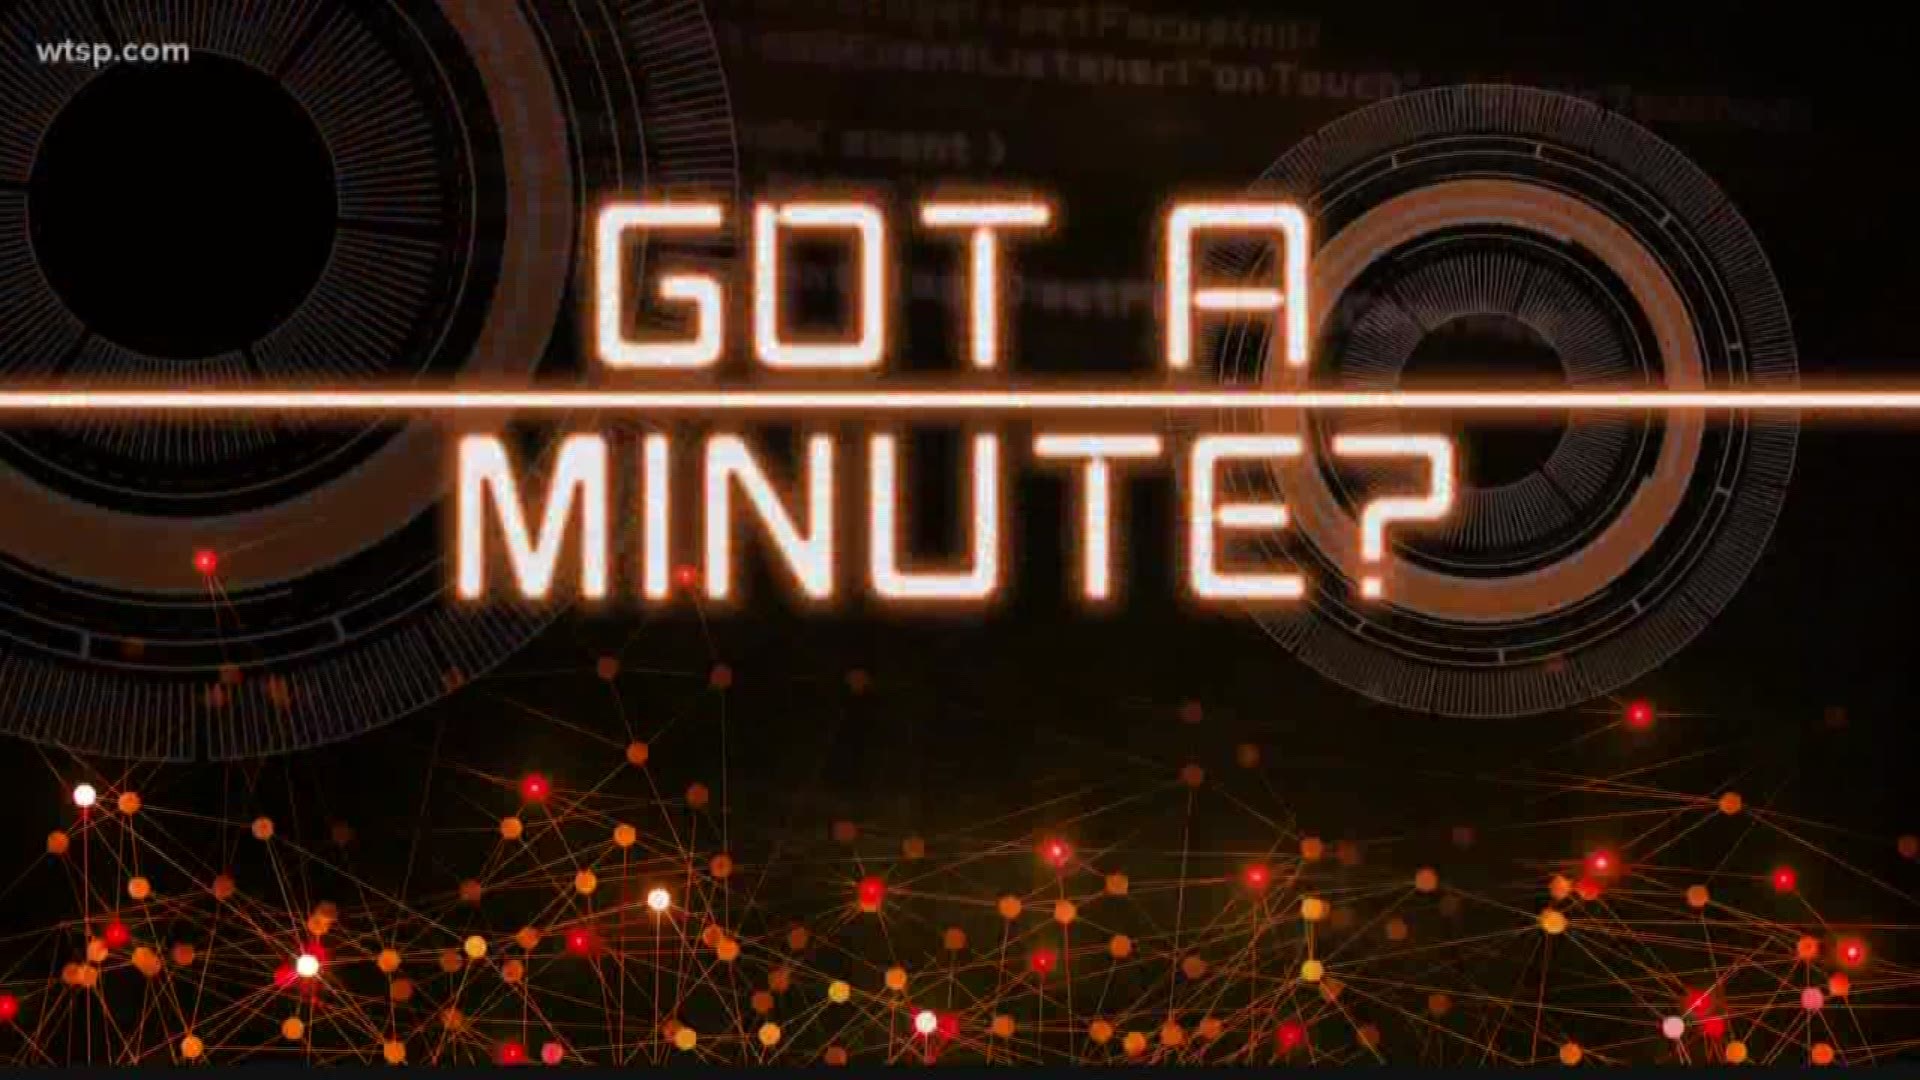 10News meteorologist Grant Gilmore explains space debris in today's Got a Minute?